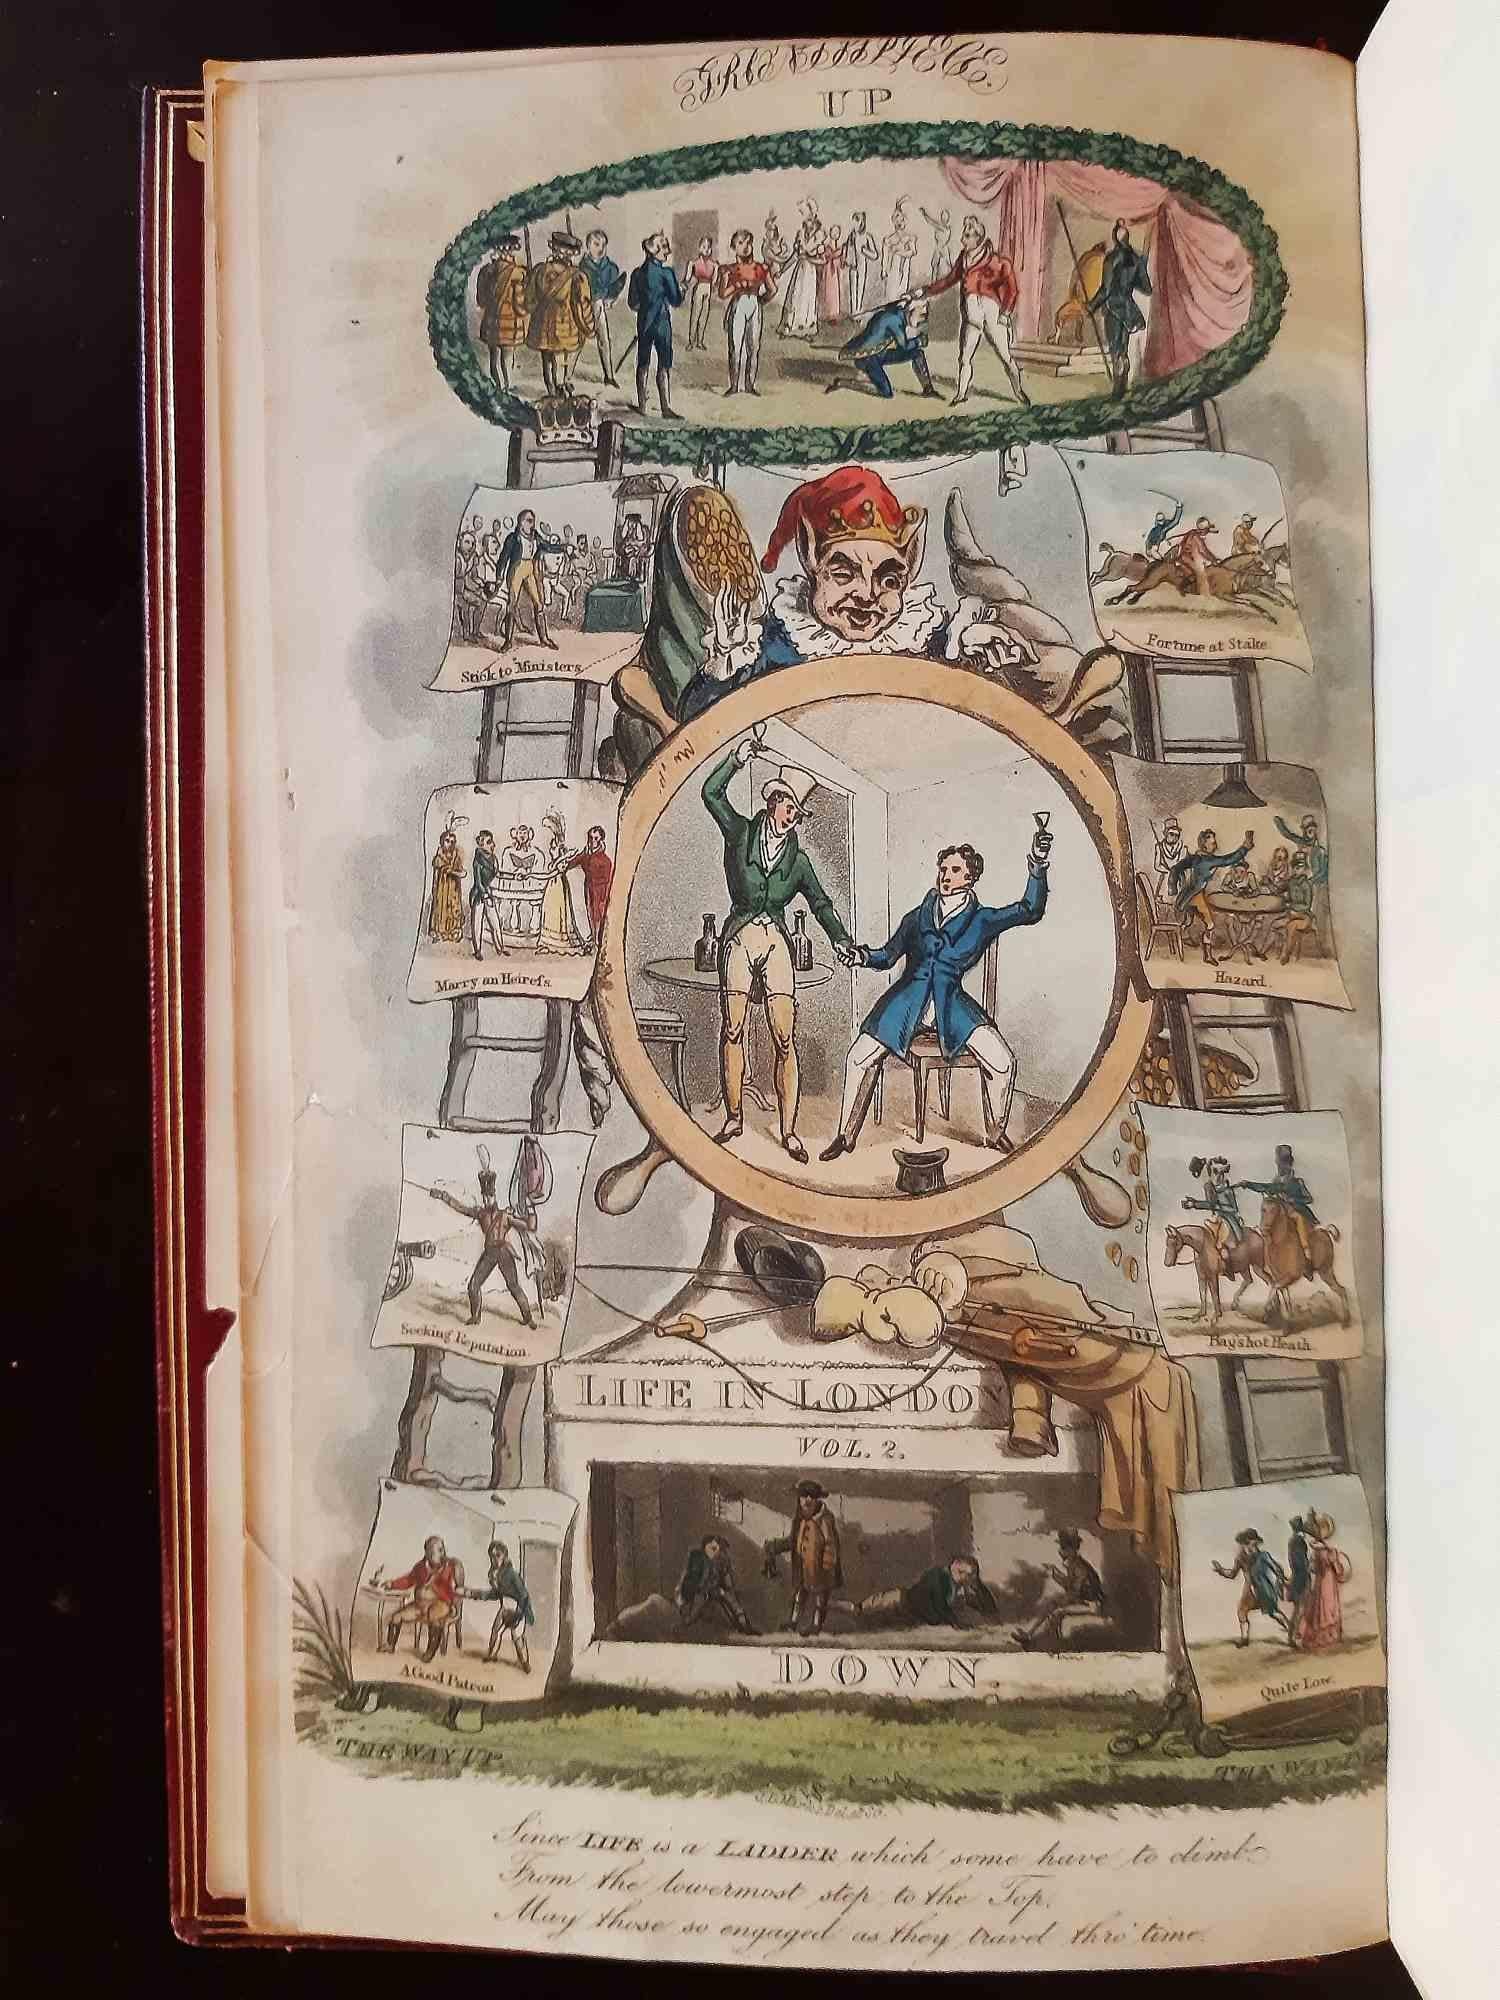 Real Life in London - Rare Book Illustrated by T. Rowlandson - 1820s For Sale 2